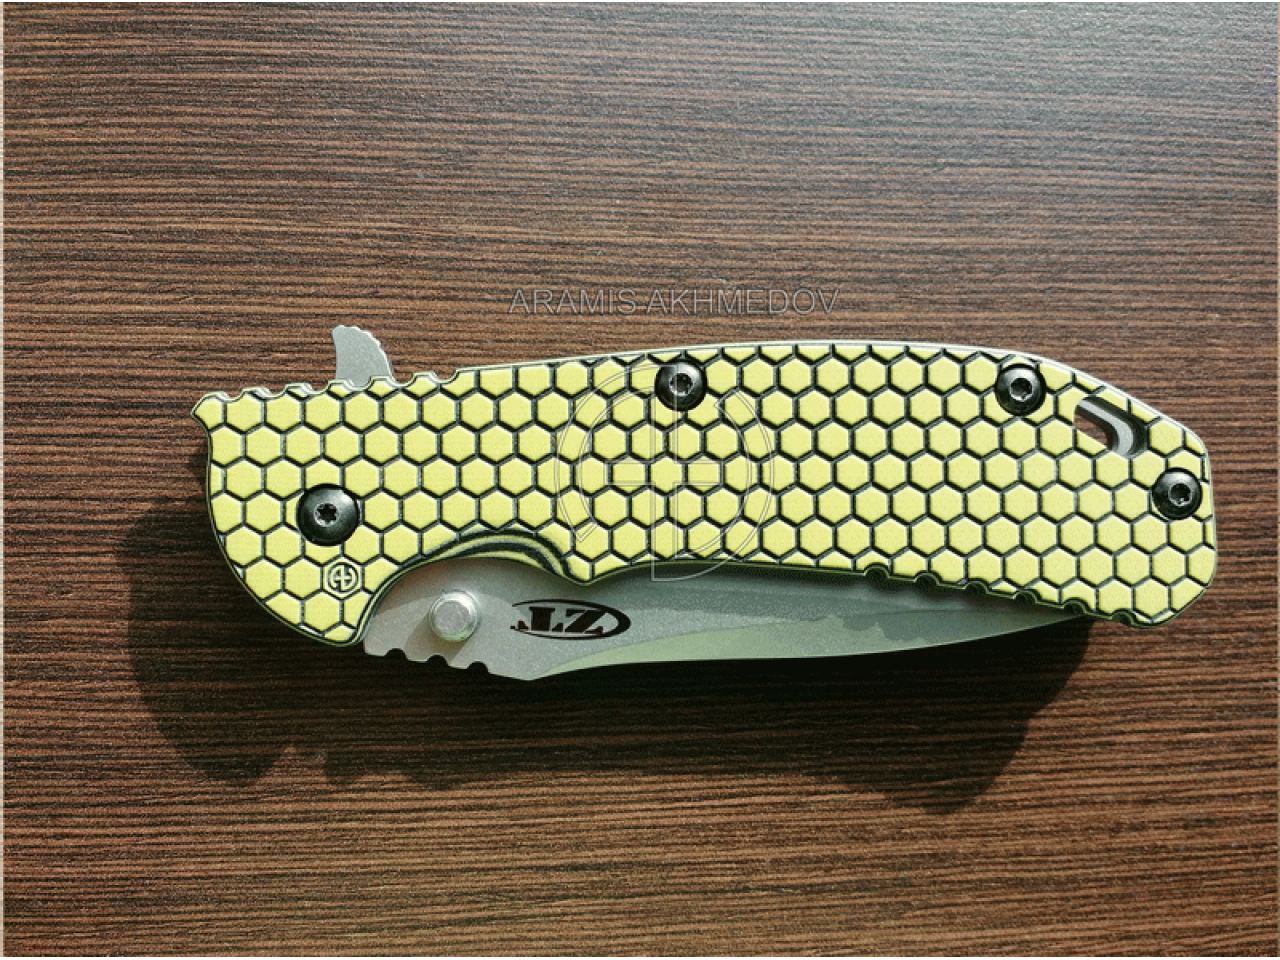 Custome scales Honeycomb, for ZT 0560, ZT 0561. knife